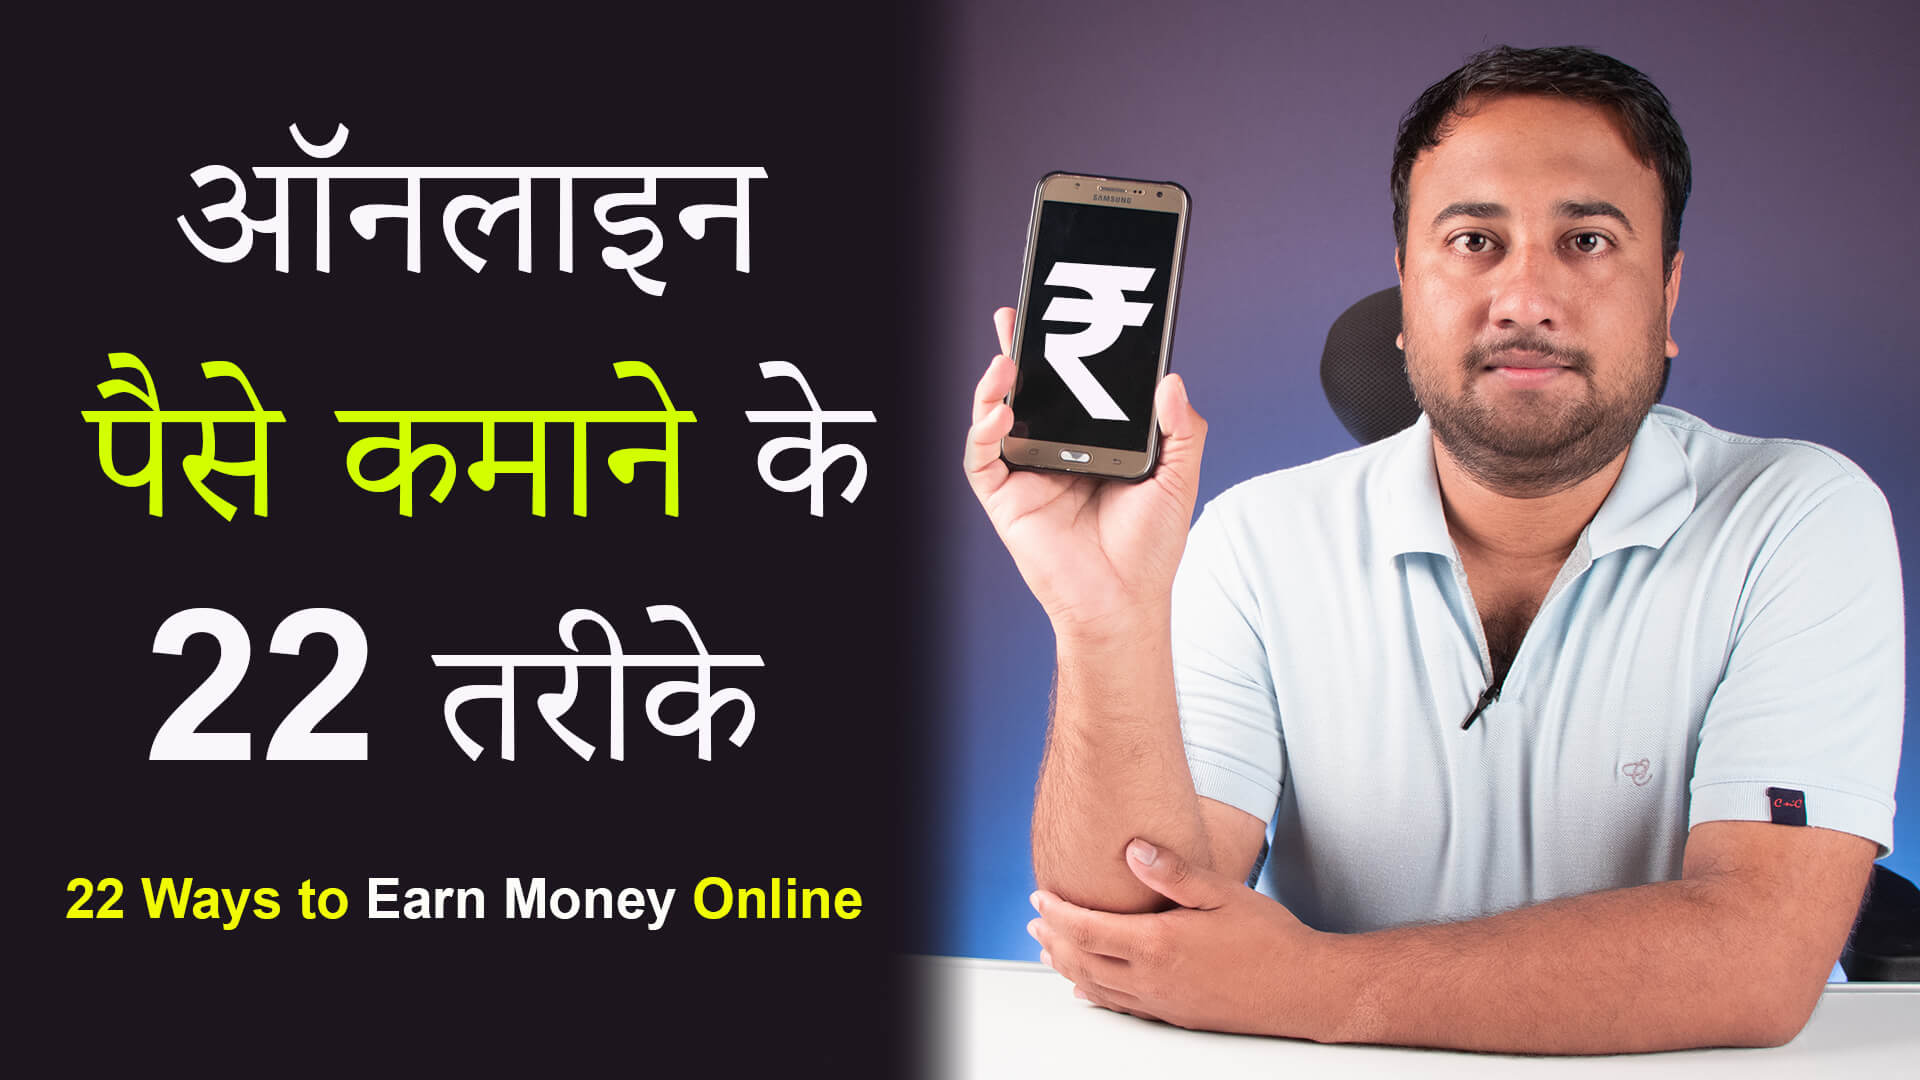 You are currently viewing Lesson – 03 : 22 Ways to Earn Money Online Hindi – How to Make Money Online?